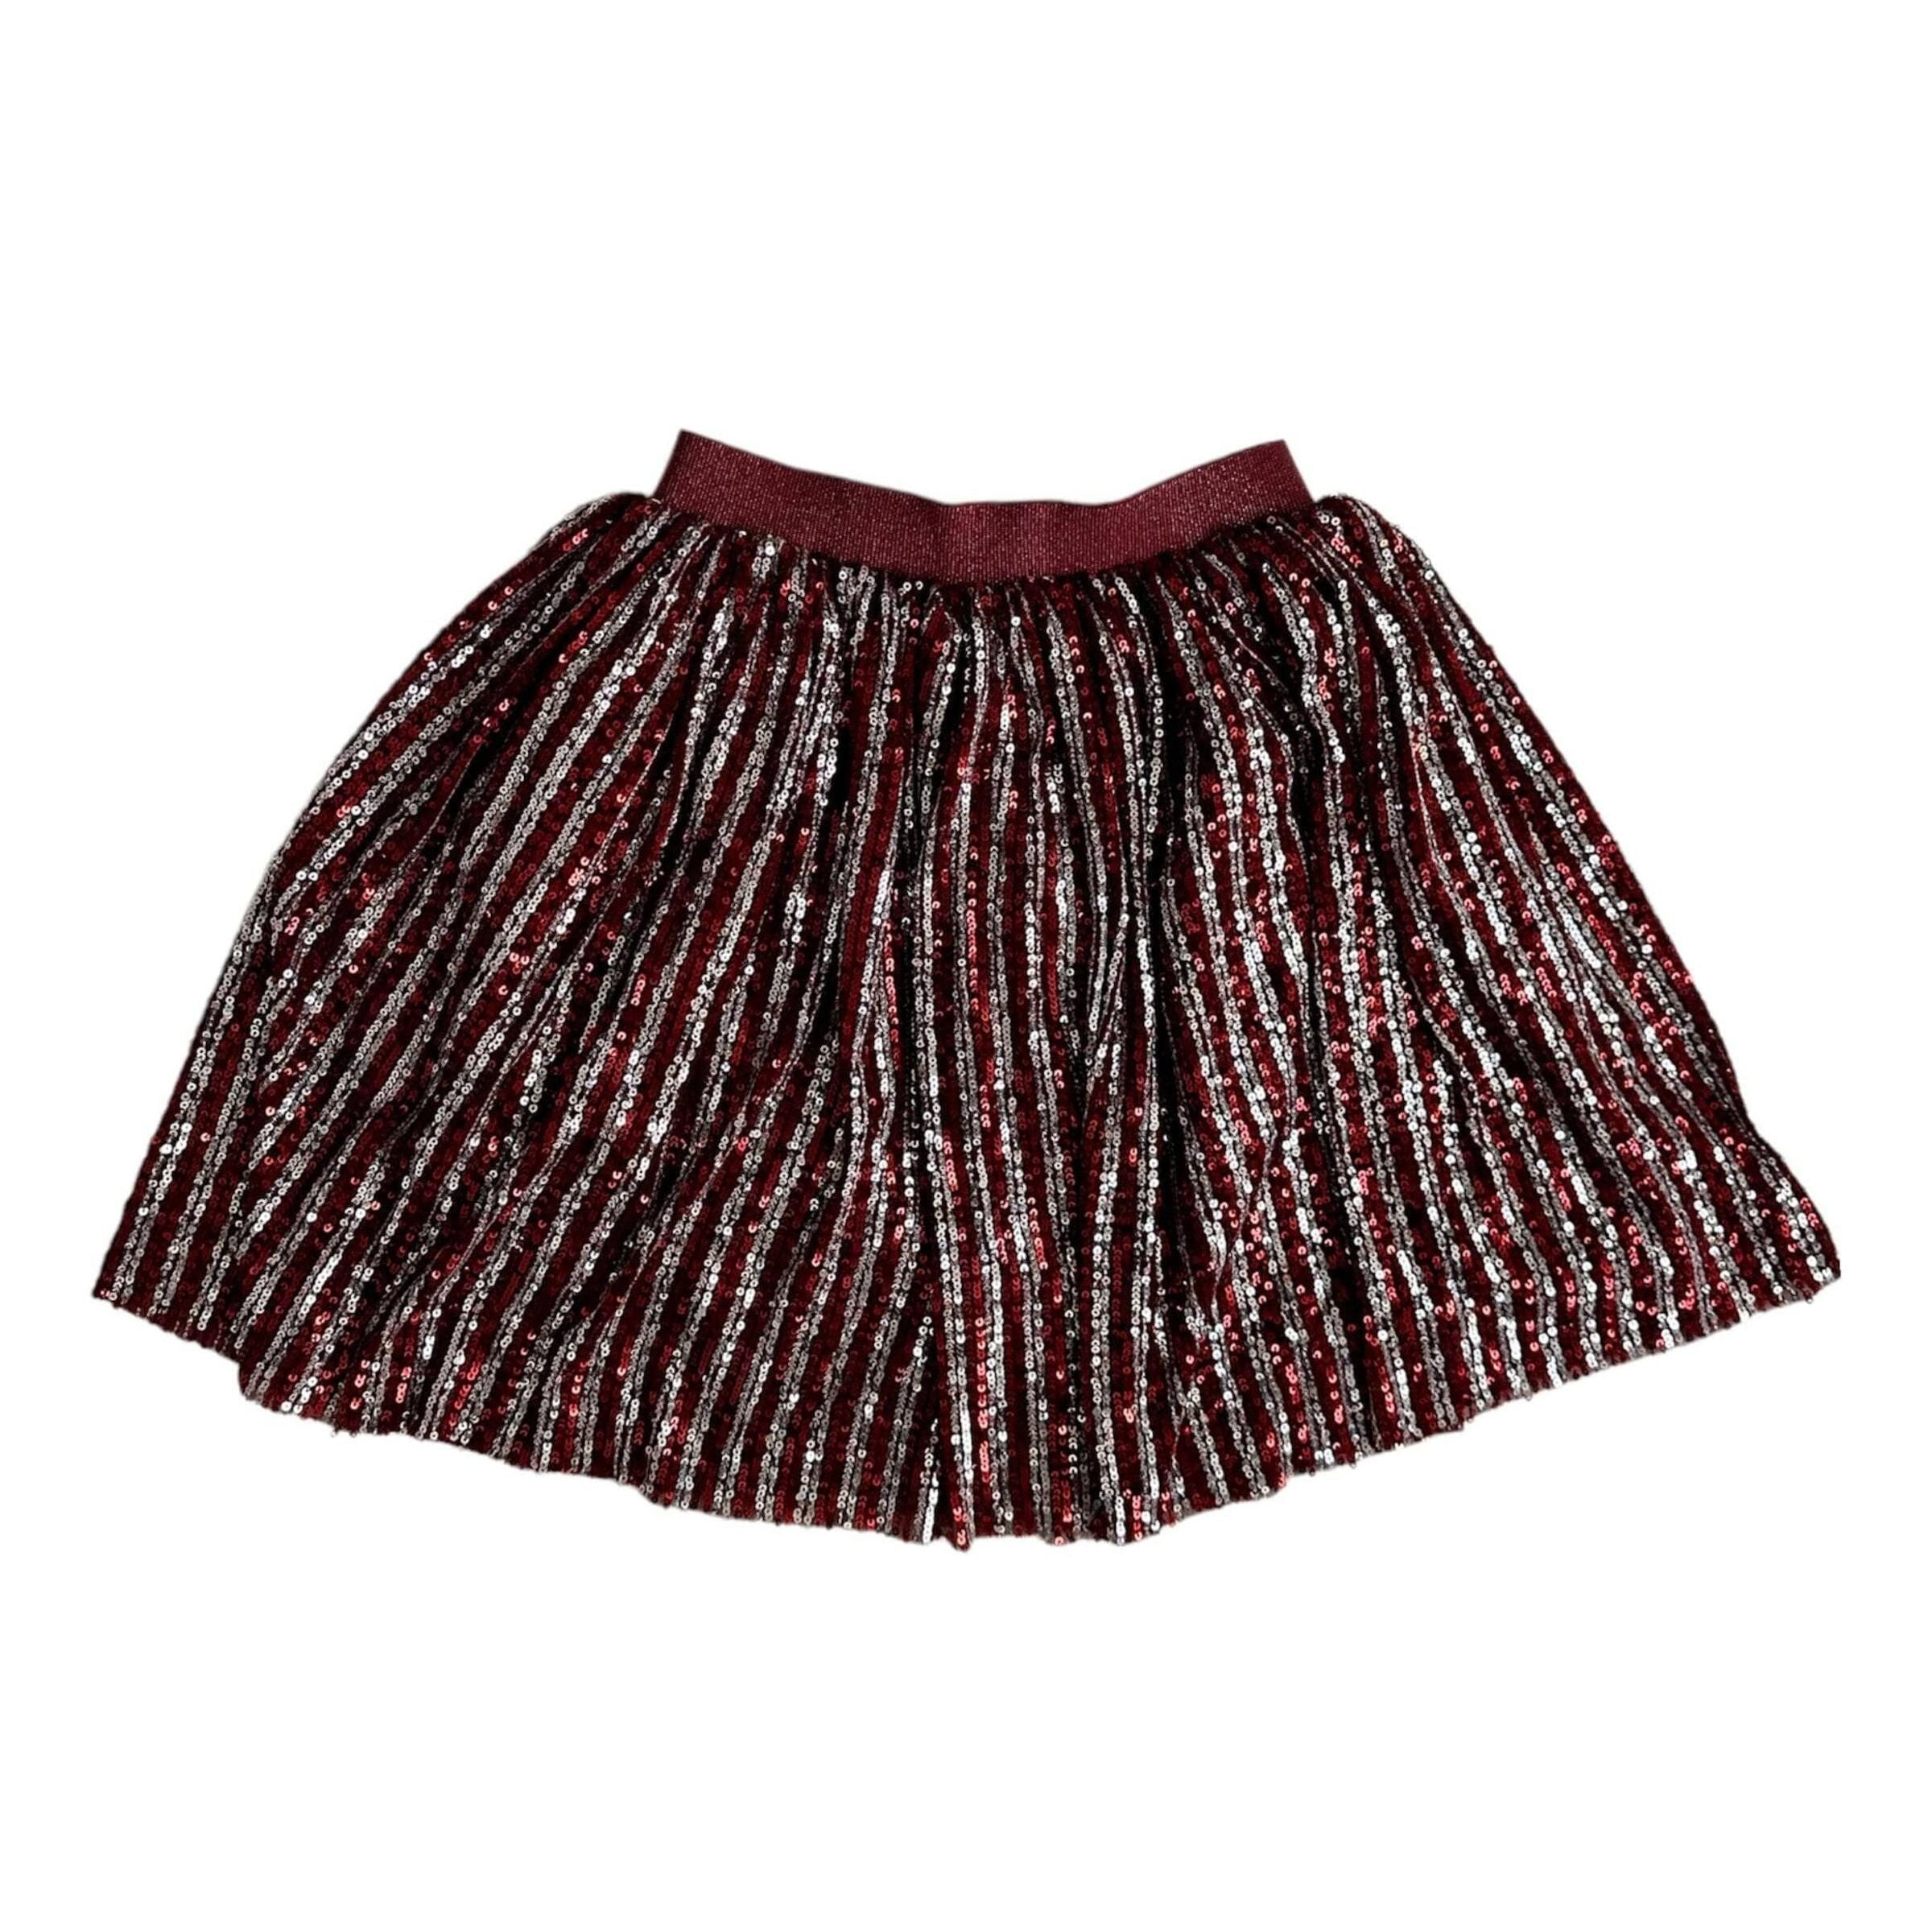 pink and silver candy cane sequin striped skirt with elastic waistband